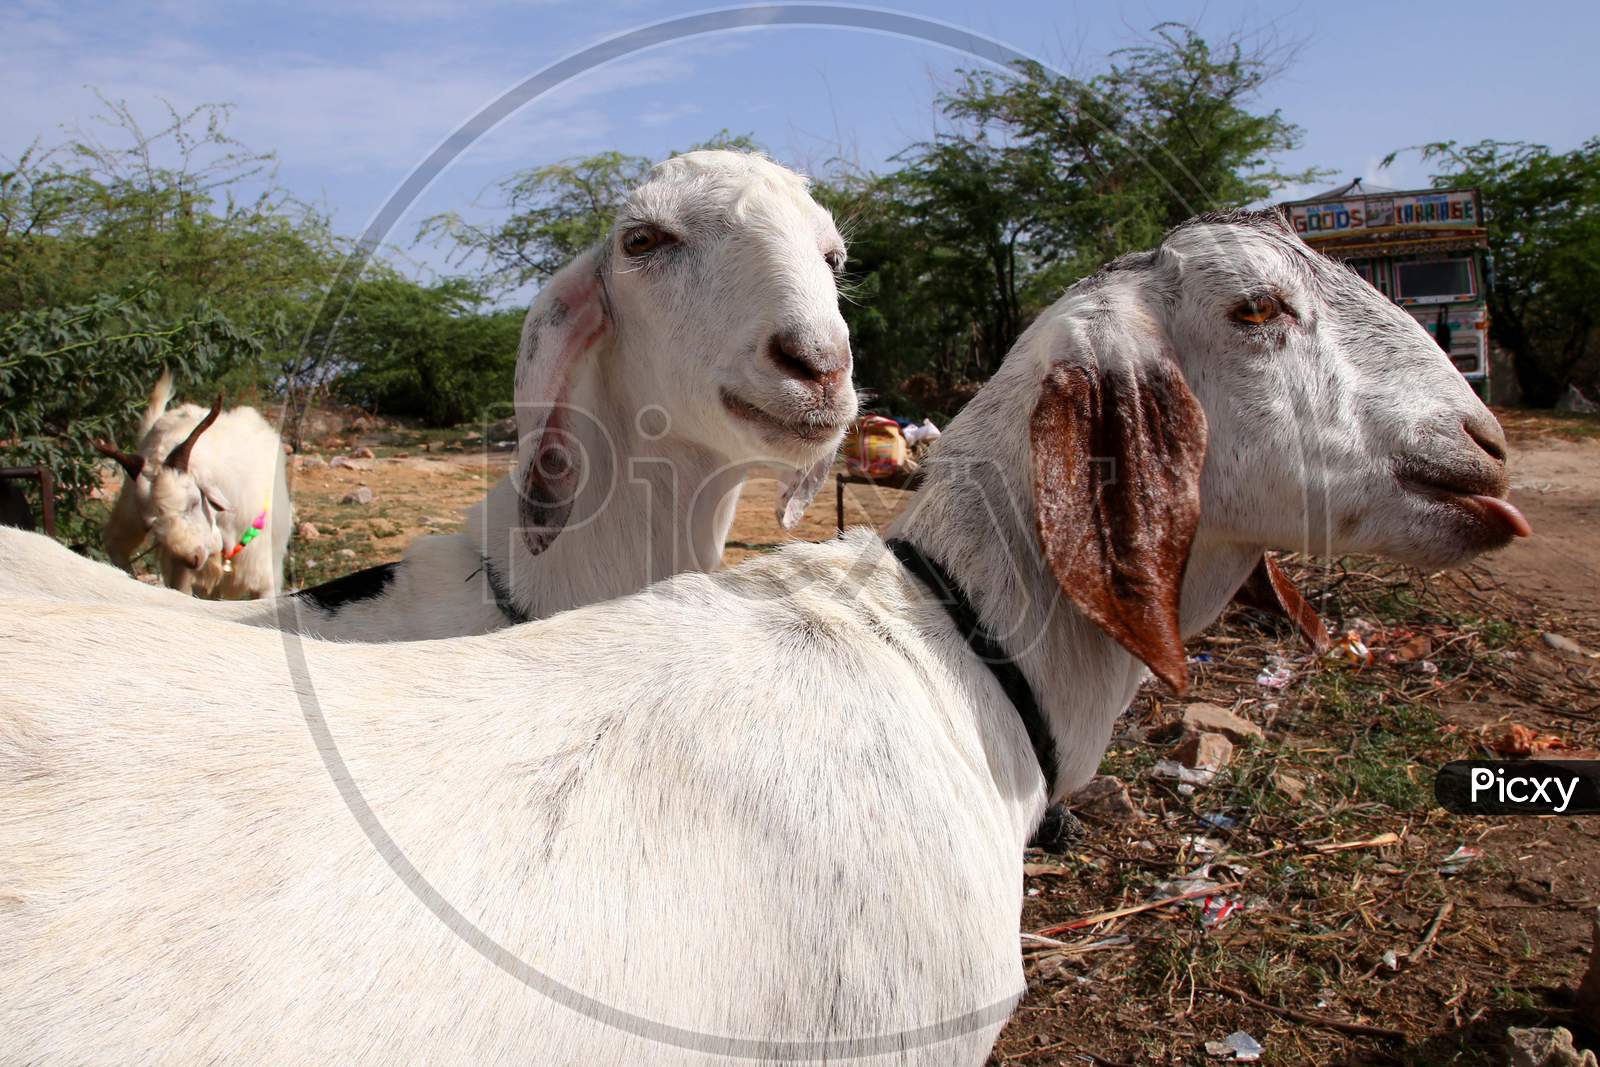 Vendors Gather Their Goats And Sheep For Sale At A Ground Ahead Of The Muslim Festival Eid Al-Adha Or The 'Festival Of Sacrifice', In Ajmer, Rajasthan, India On July 23, 2020.